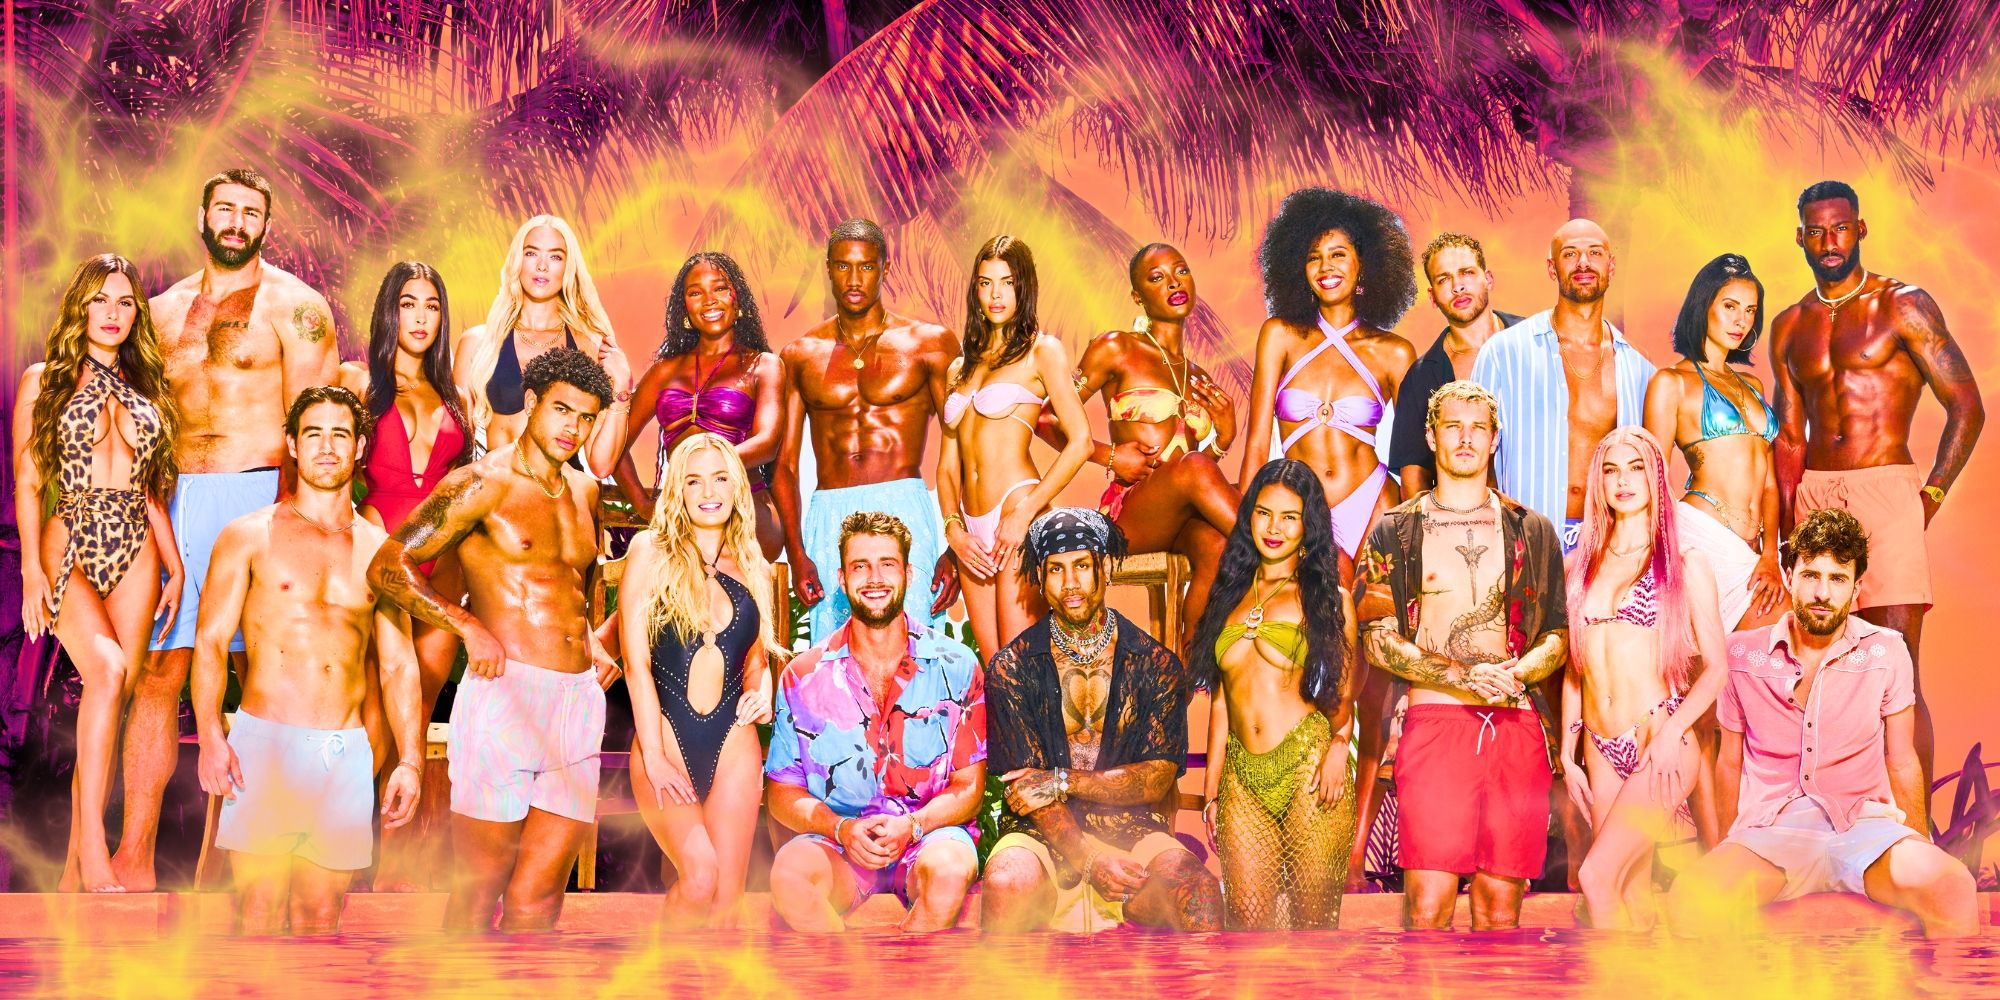 The Perfect Match Season 2 cast wears swimsuits with a bright, tropical background